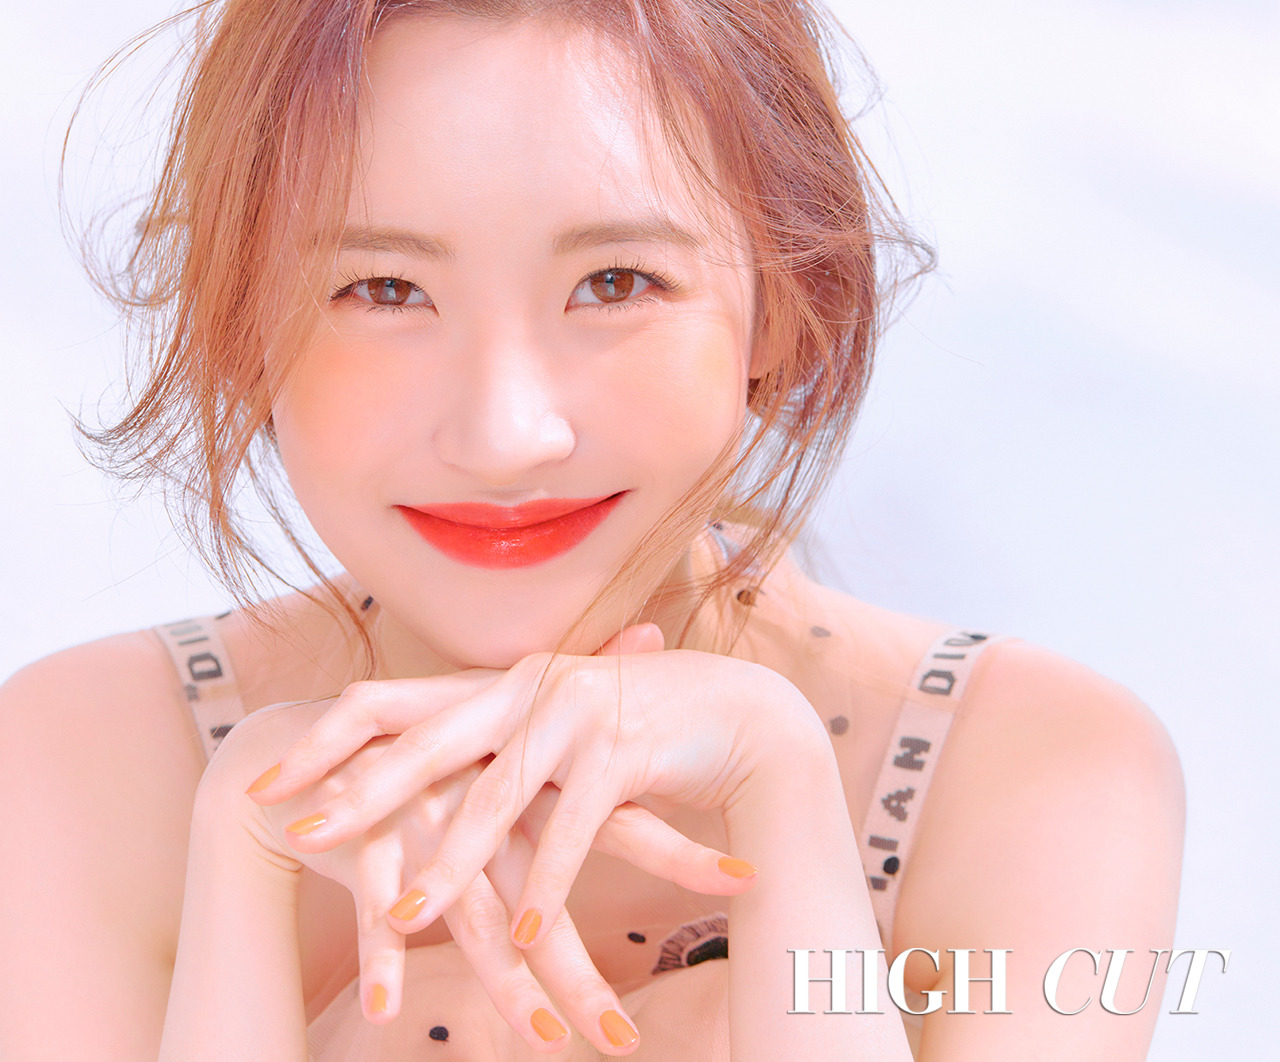 Sunmi showed off the charm of Beauty Queen through the star style magazine Hycutt picture published on the 7th.As proof of the title of Lipstick Wanpanmaid, Dior Beautys fresh and fascinated color Lipstick and makeup were digested.Lipstick, which has RED, orange, coral and hot pink colors that will play a powerful point in summer makeup, permeates the lips like juice.In particular, the orange Lipstick showed a perfect synchro rate with Sunmi, called Human Peach, and turned on charm and beauty.As well as the Fascinational flawless skin expression, Sunmis colorful facial expressions and poses are also outstanding.In the interview, Sunmi said, I did too much body gags about JTBC4 observational entertainment Secret Sister recently started.There are few people shooting, and when I went back to the camera, I blinked. I saw all the usual behaviors at home.Even when I tried to take off my clothes, I laughed, Aaa camera! And even when I was going to the bathroom, Aaa camera!Secret sister also revealed her impressions with Red Velvet Seulgi, who said: I originally liked Red Velvet so much.At the end of the main character activity, Red Velvet came back to Bad Boy and had many opportunities to see the stage, among which Seulgi was very prominent.Its so cool and chic, the power from the big keys and the ghetto.Sunmi, who has been truly free on stage since Innocent Thing, said, Even though I had a solo album and Wonder Girls, I had not found my identity until then.I had a lot of time to come out of JYP and think about me, but then I started to virtue about people.I was stuck in the middle of my investigation because I thought, I do not want people to hate it, I do not want to say anything.There are people who hate Michael Jackson, Prince, and Beyonce... Before returning to Innocent Thing, I got an enlightenment.It seems to be reflected in the music video and delivered to people through the stage. Sunmis interviews with the pictures can be found in Hycutt 223, published on June 7.